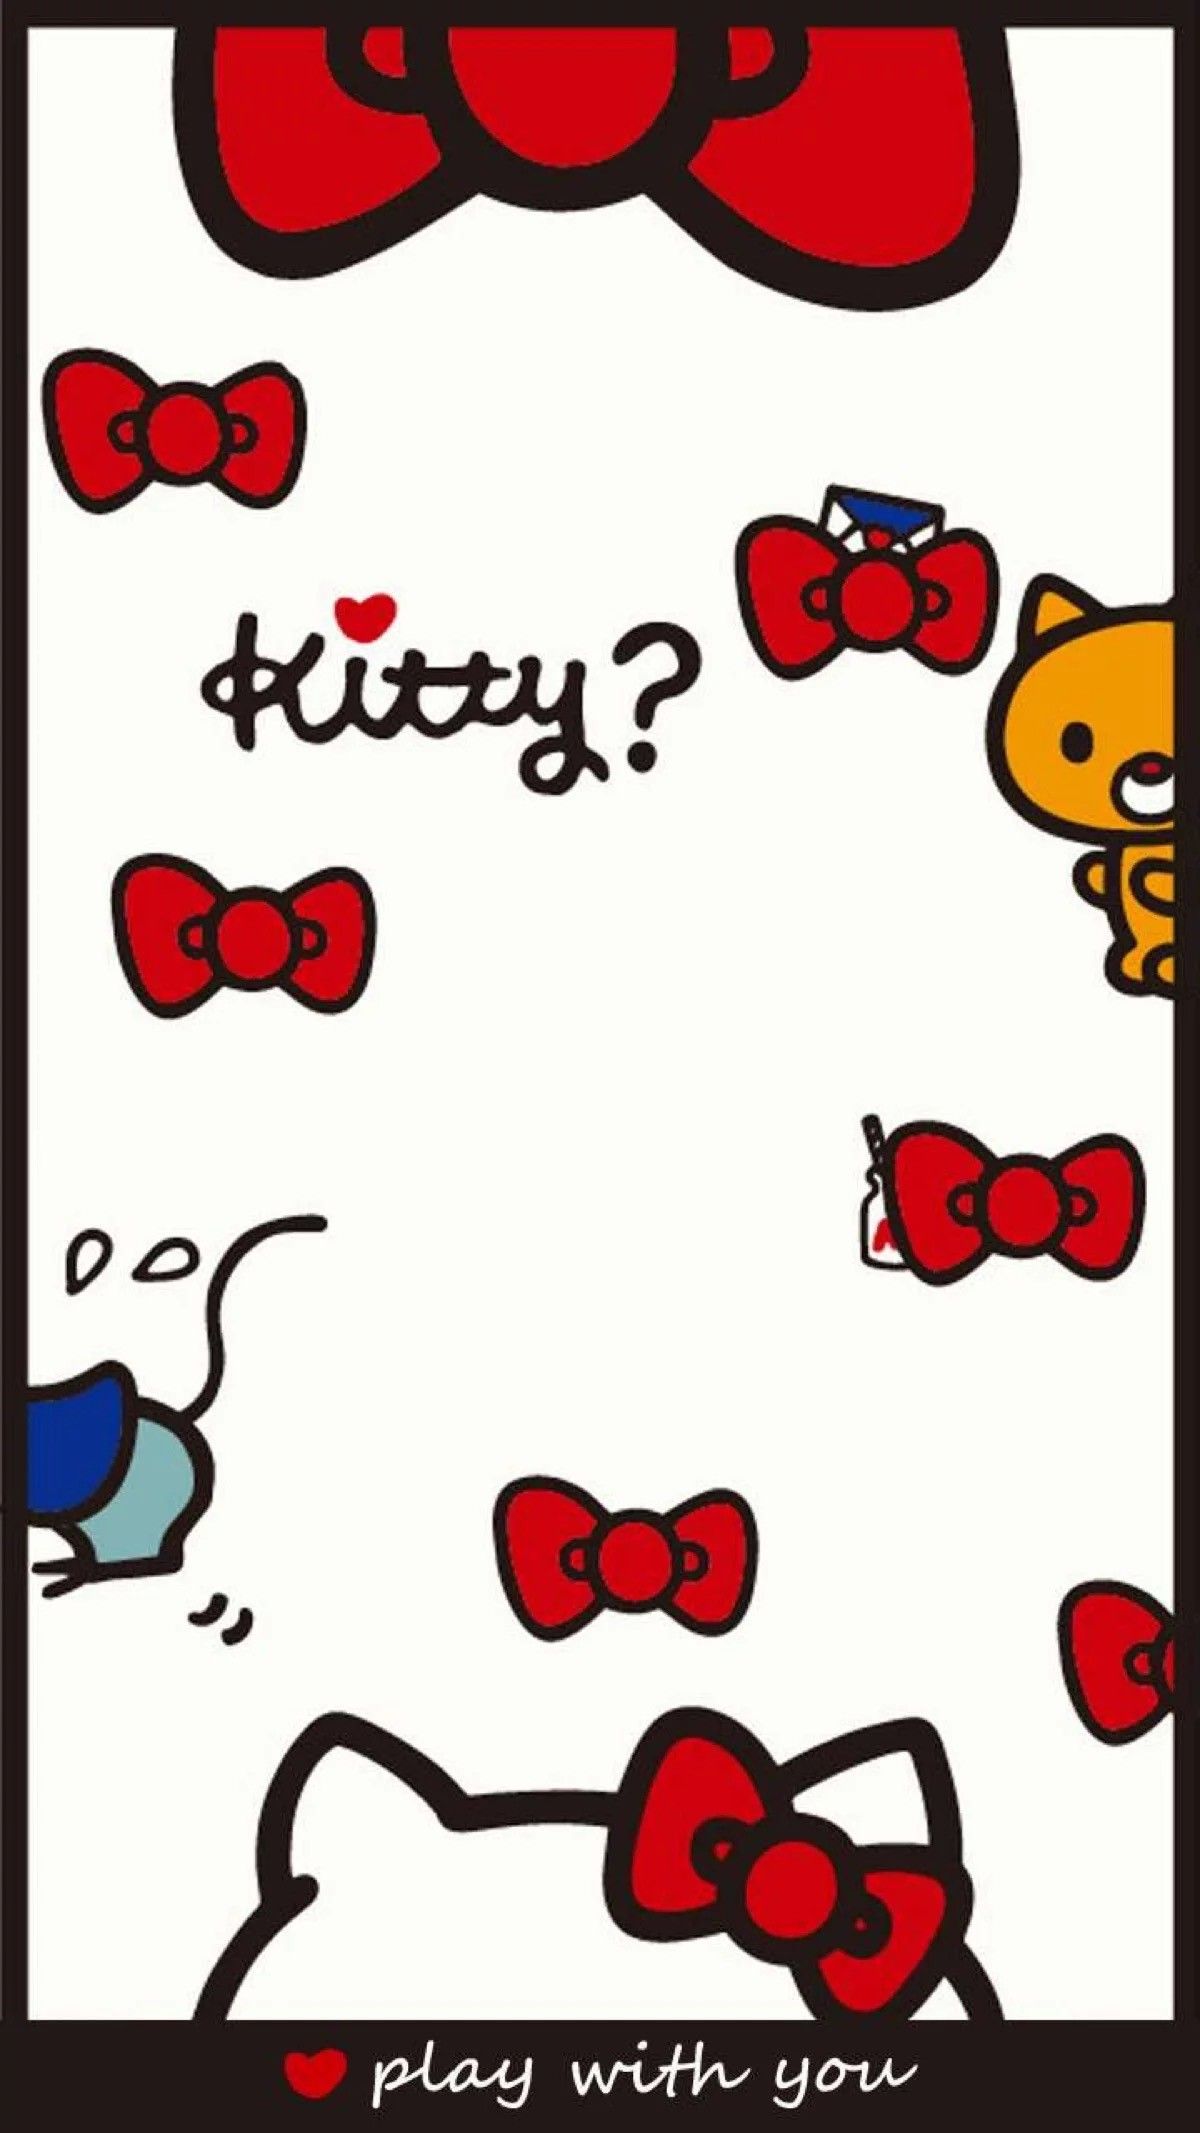 IPhone wallpaper with Hello Kitty and friends - Hello Kitty, Sanrio